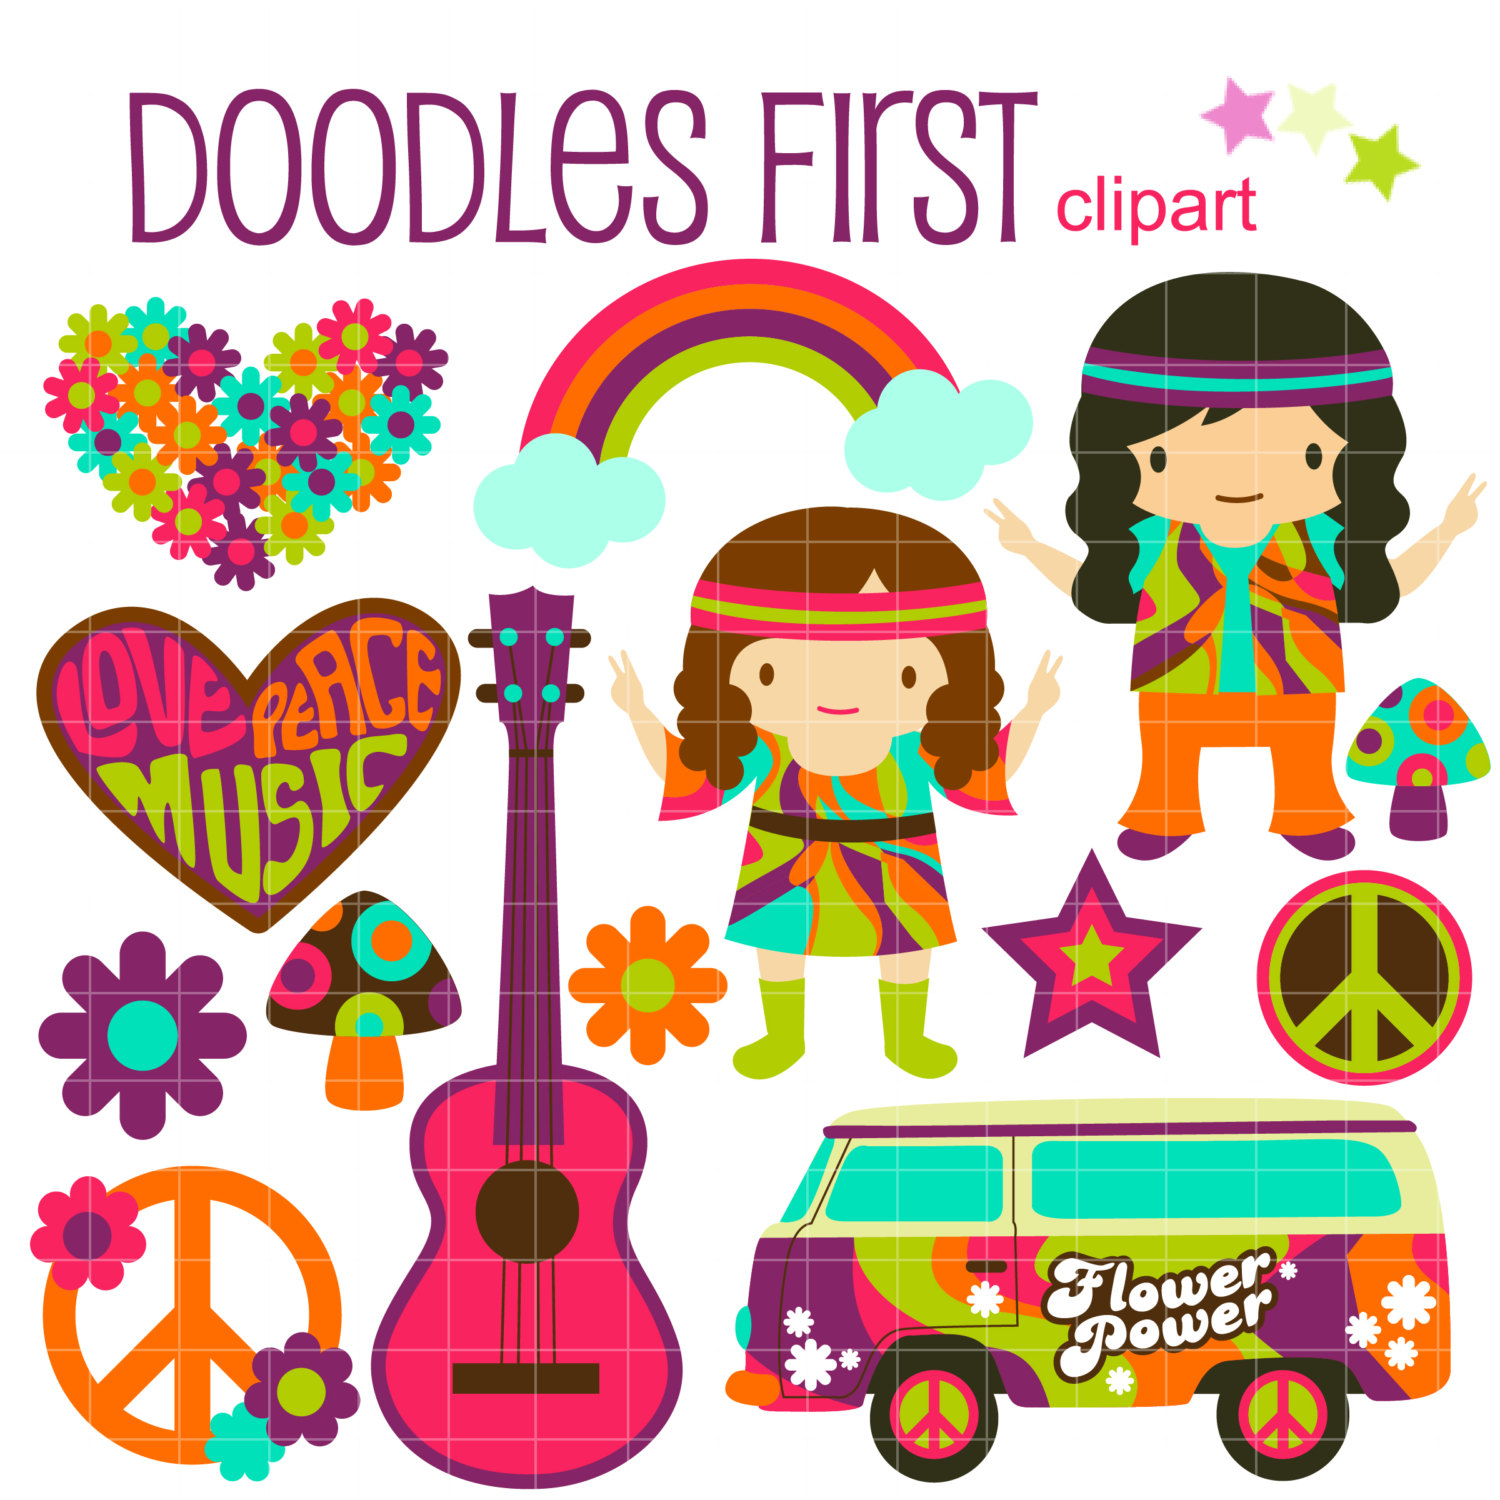 Retro Hippie 70&Digital Clip Art for by DoodlesFirst